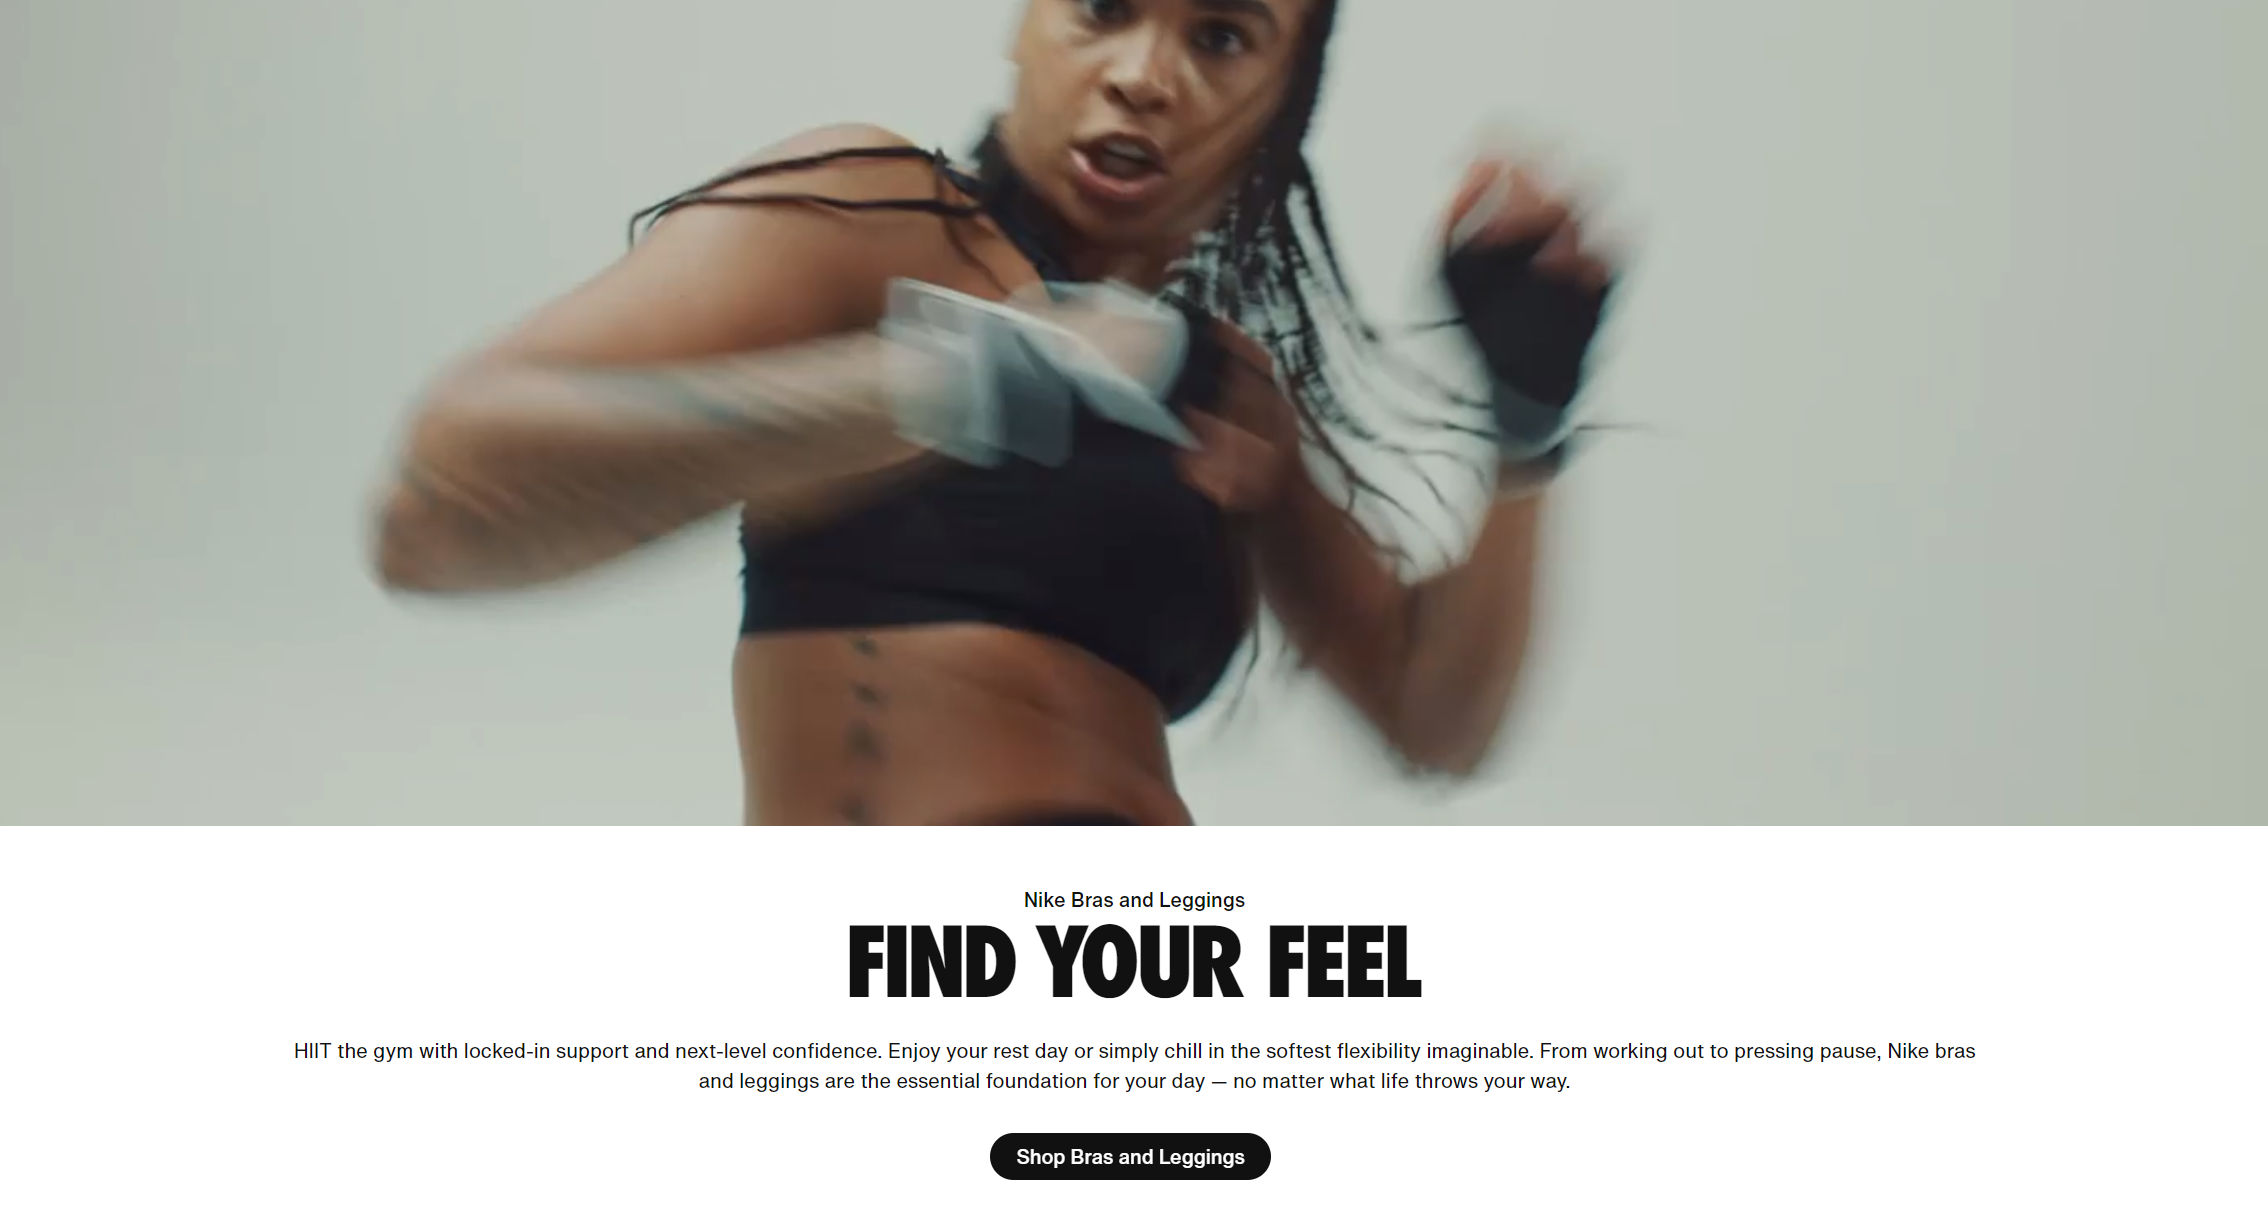 Nike already succesull with ecommerce design trends